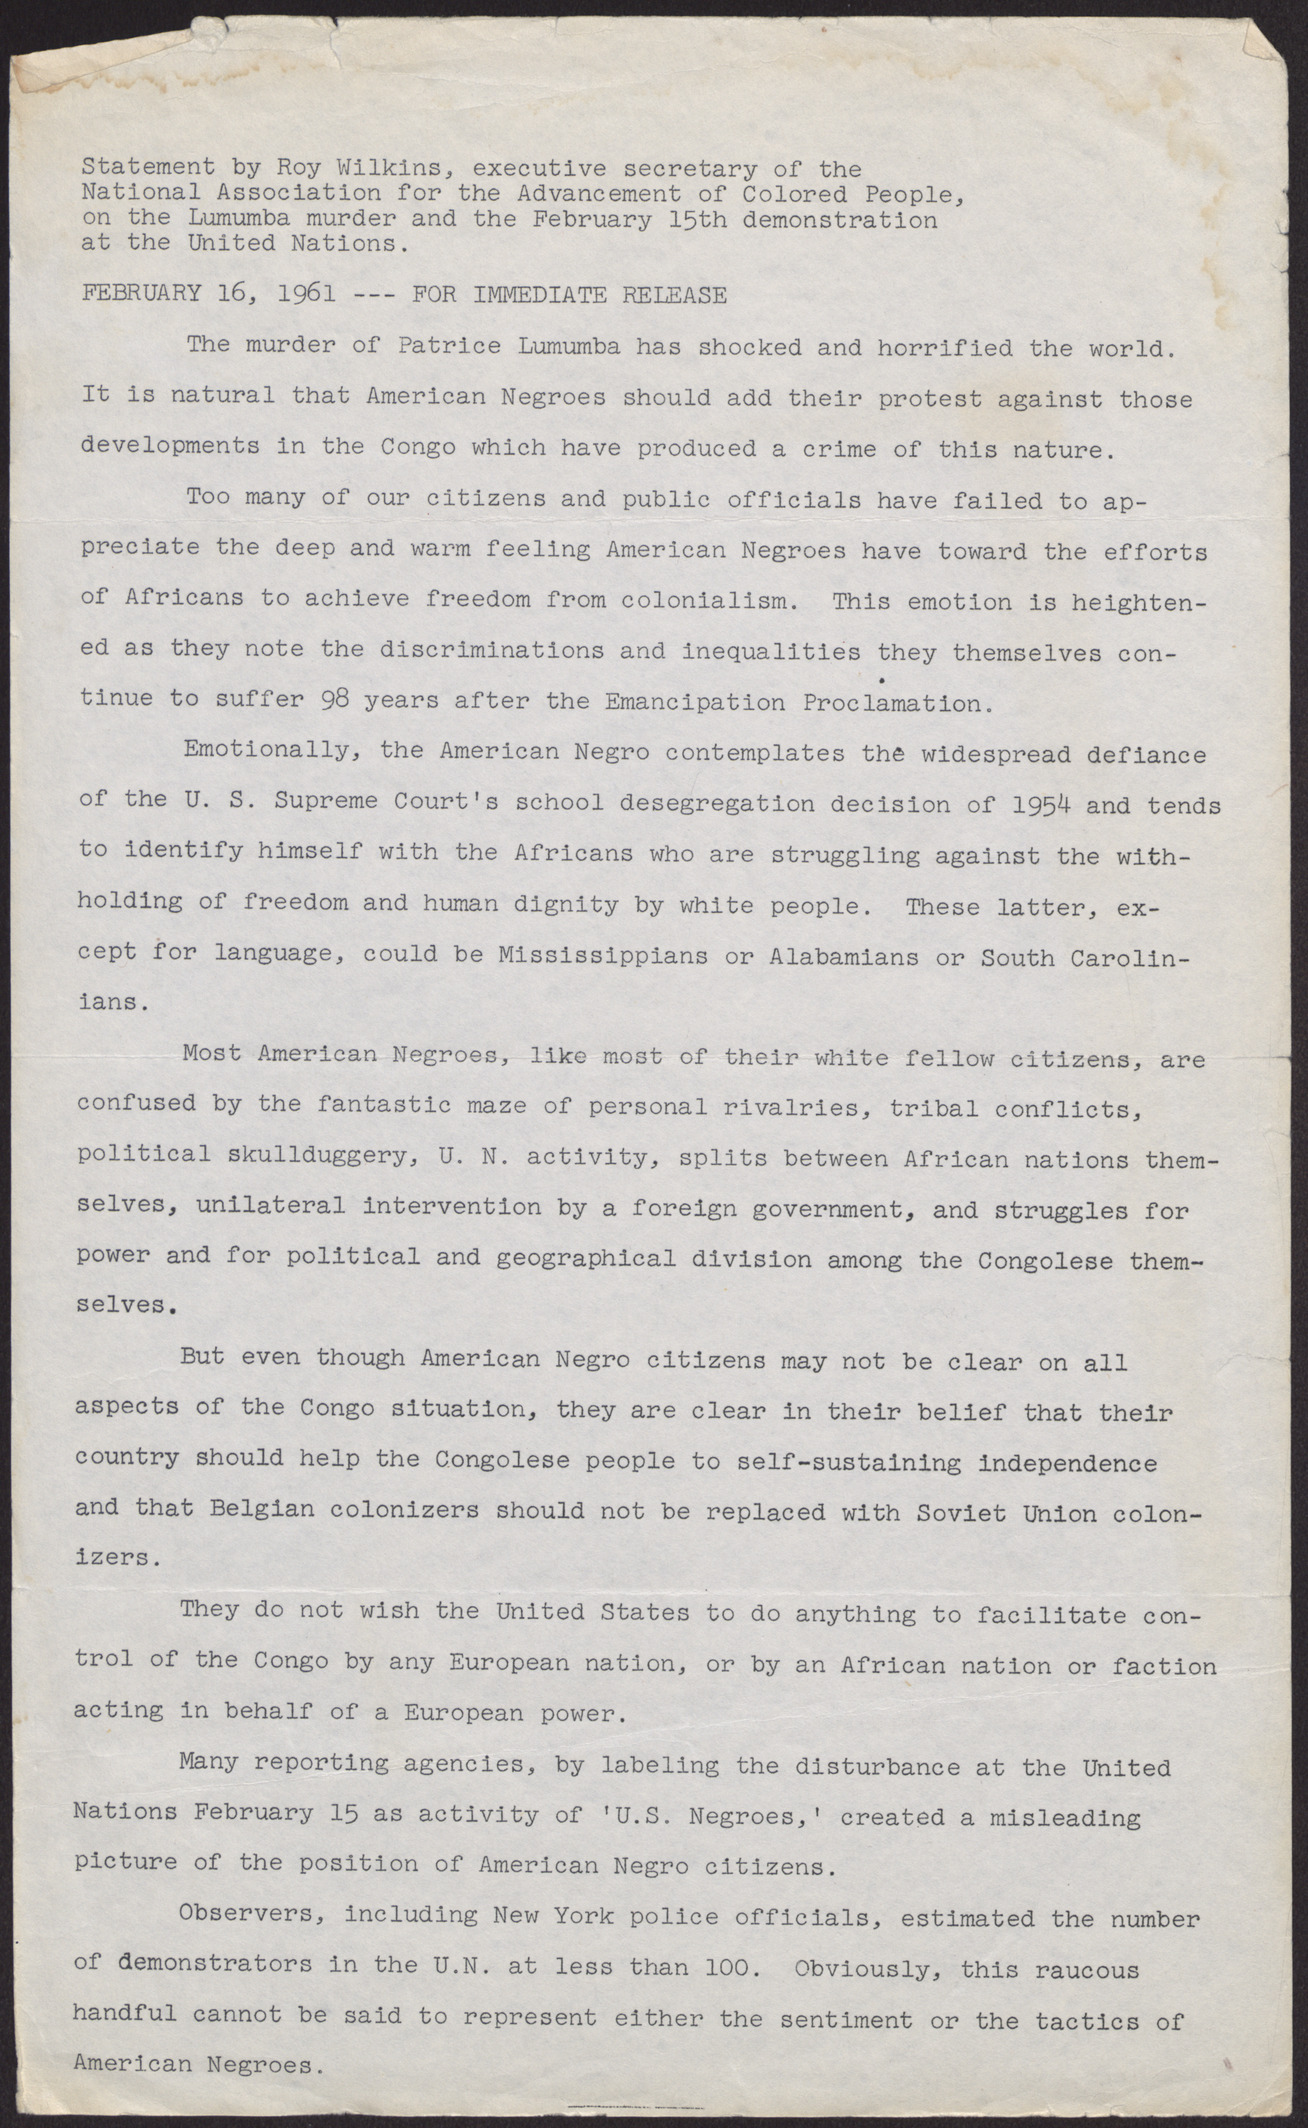 Statement by Roy Wilkins, executive secretary of the NAACP, on the Lumumba murder and the February 15th demonstration at the United Nations, February 16, 1961